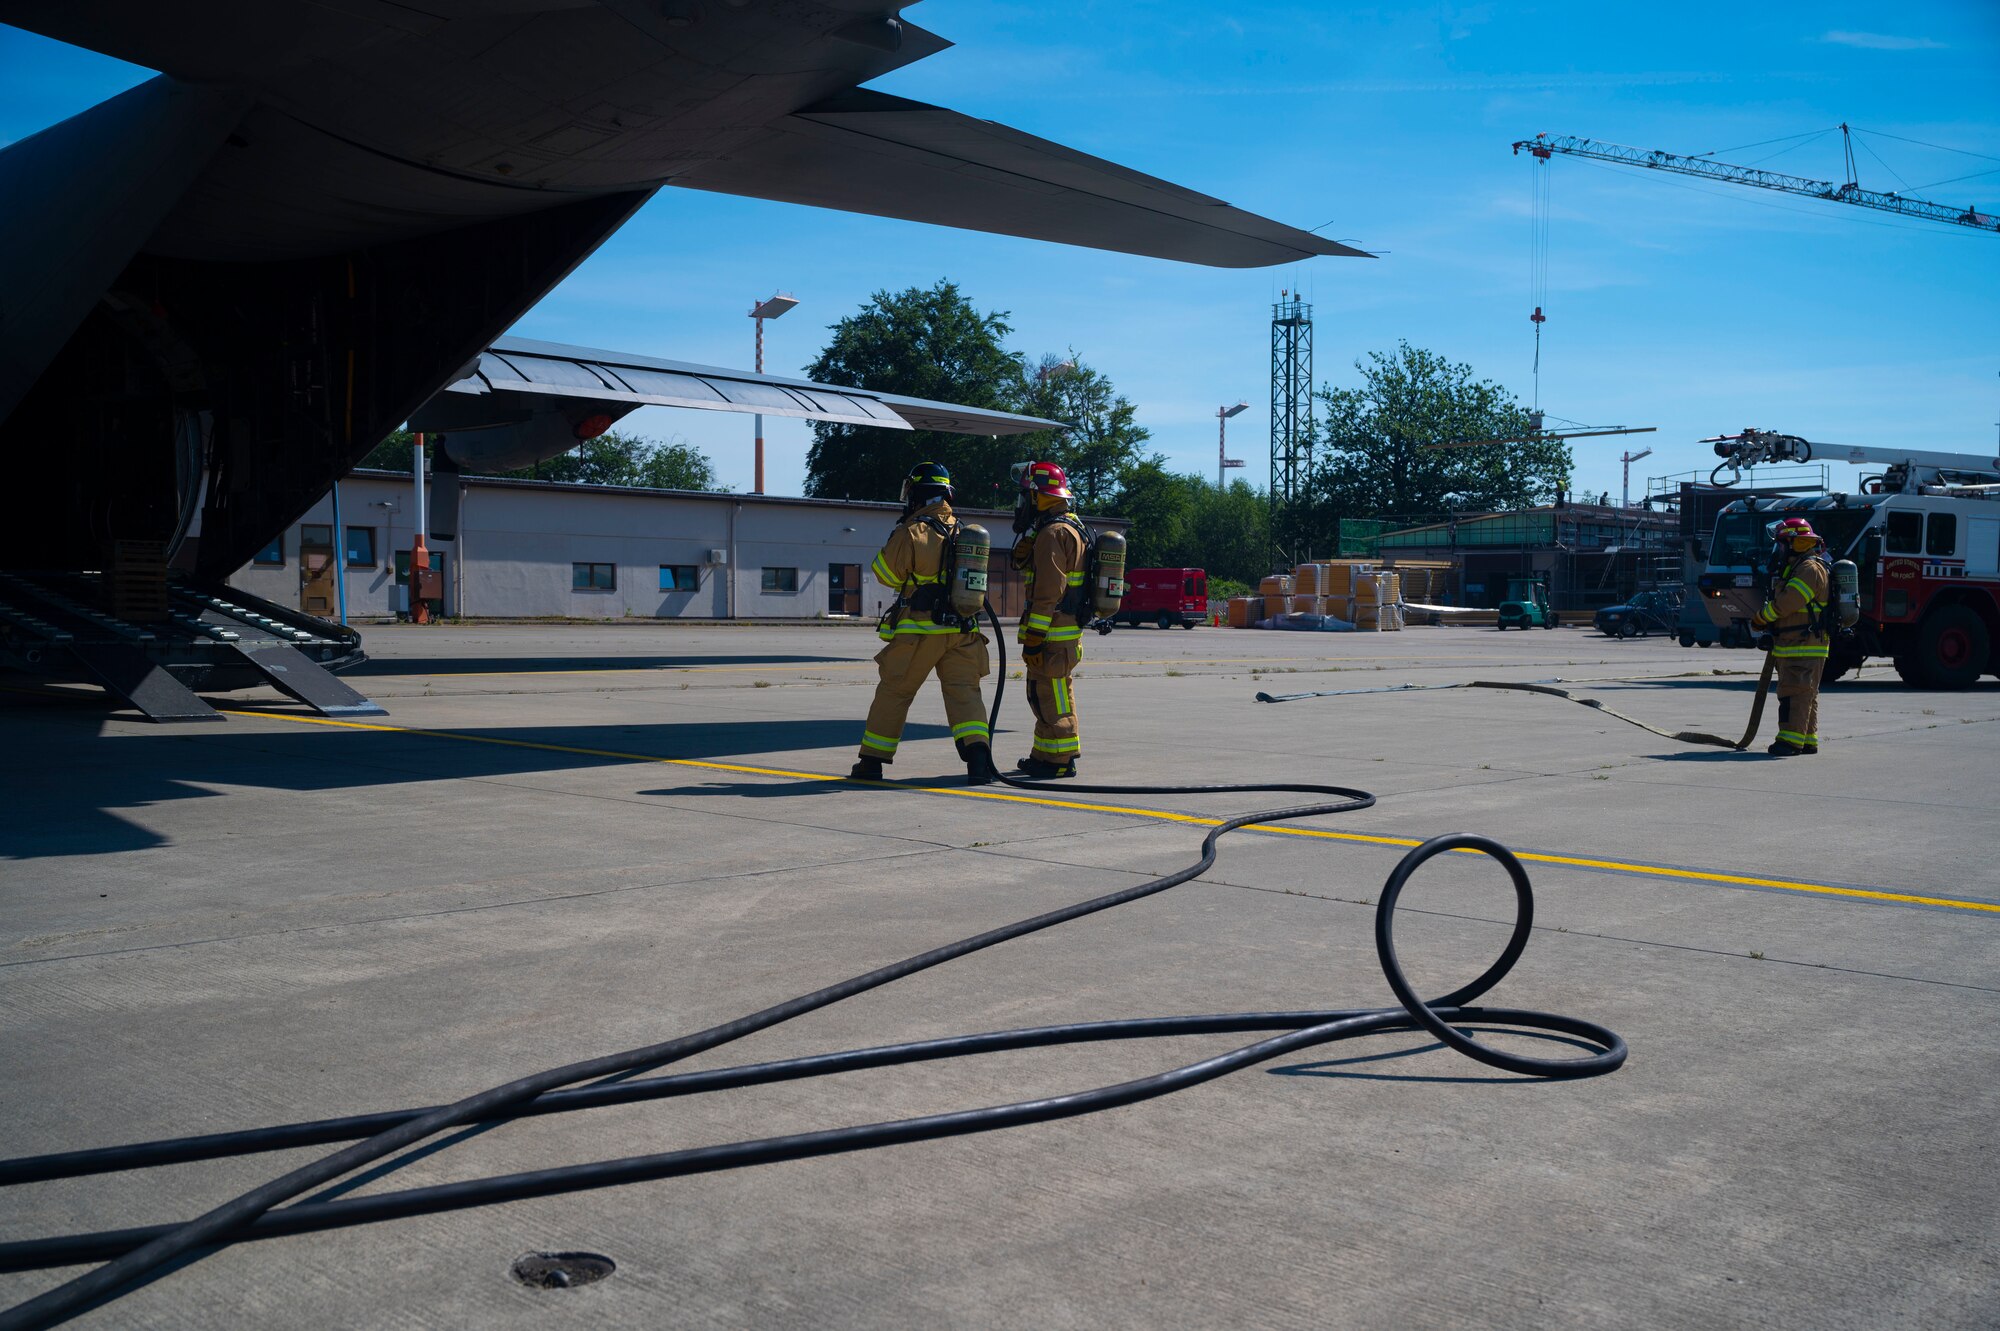 U.S. Air Force firefighters assigned to the 86th Civil Engineer Squadron conduct aircraft fire training exercises